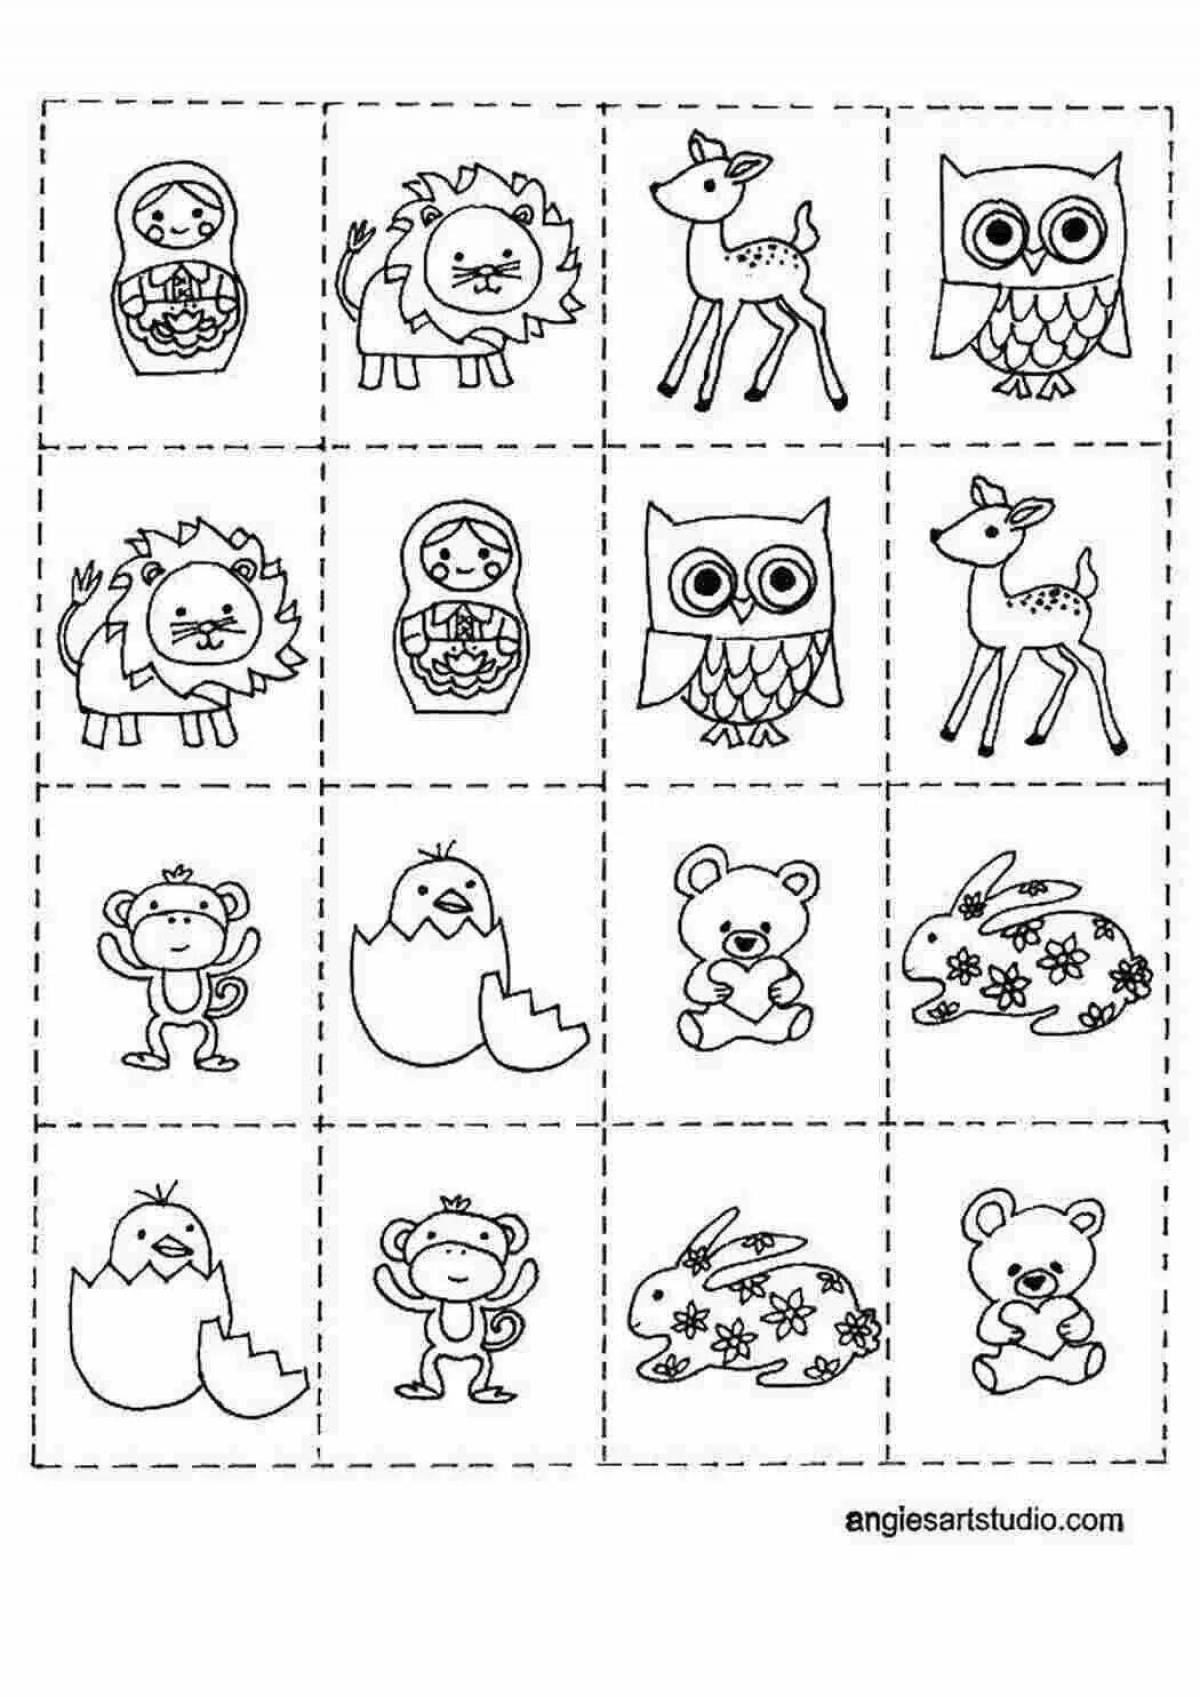 Colourful coloring pages for holidays